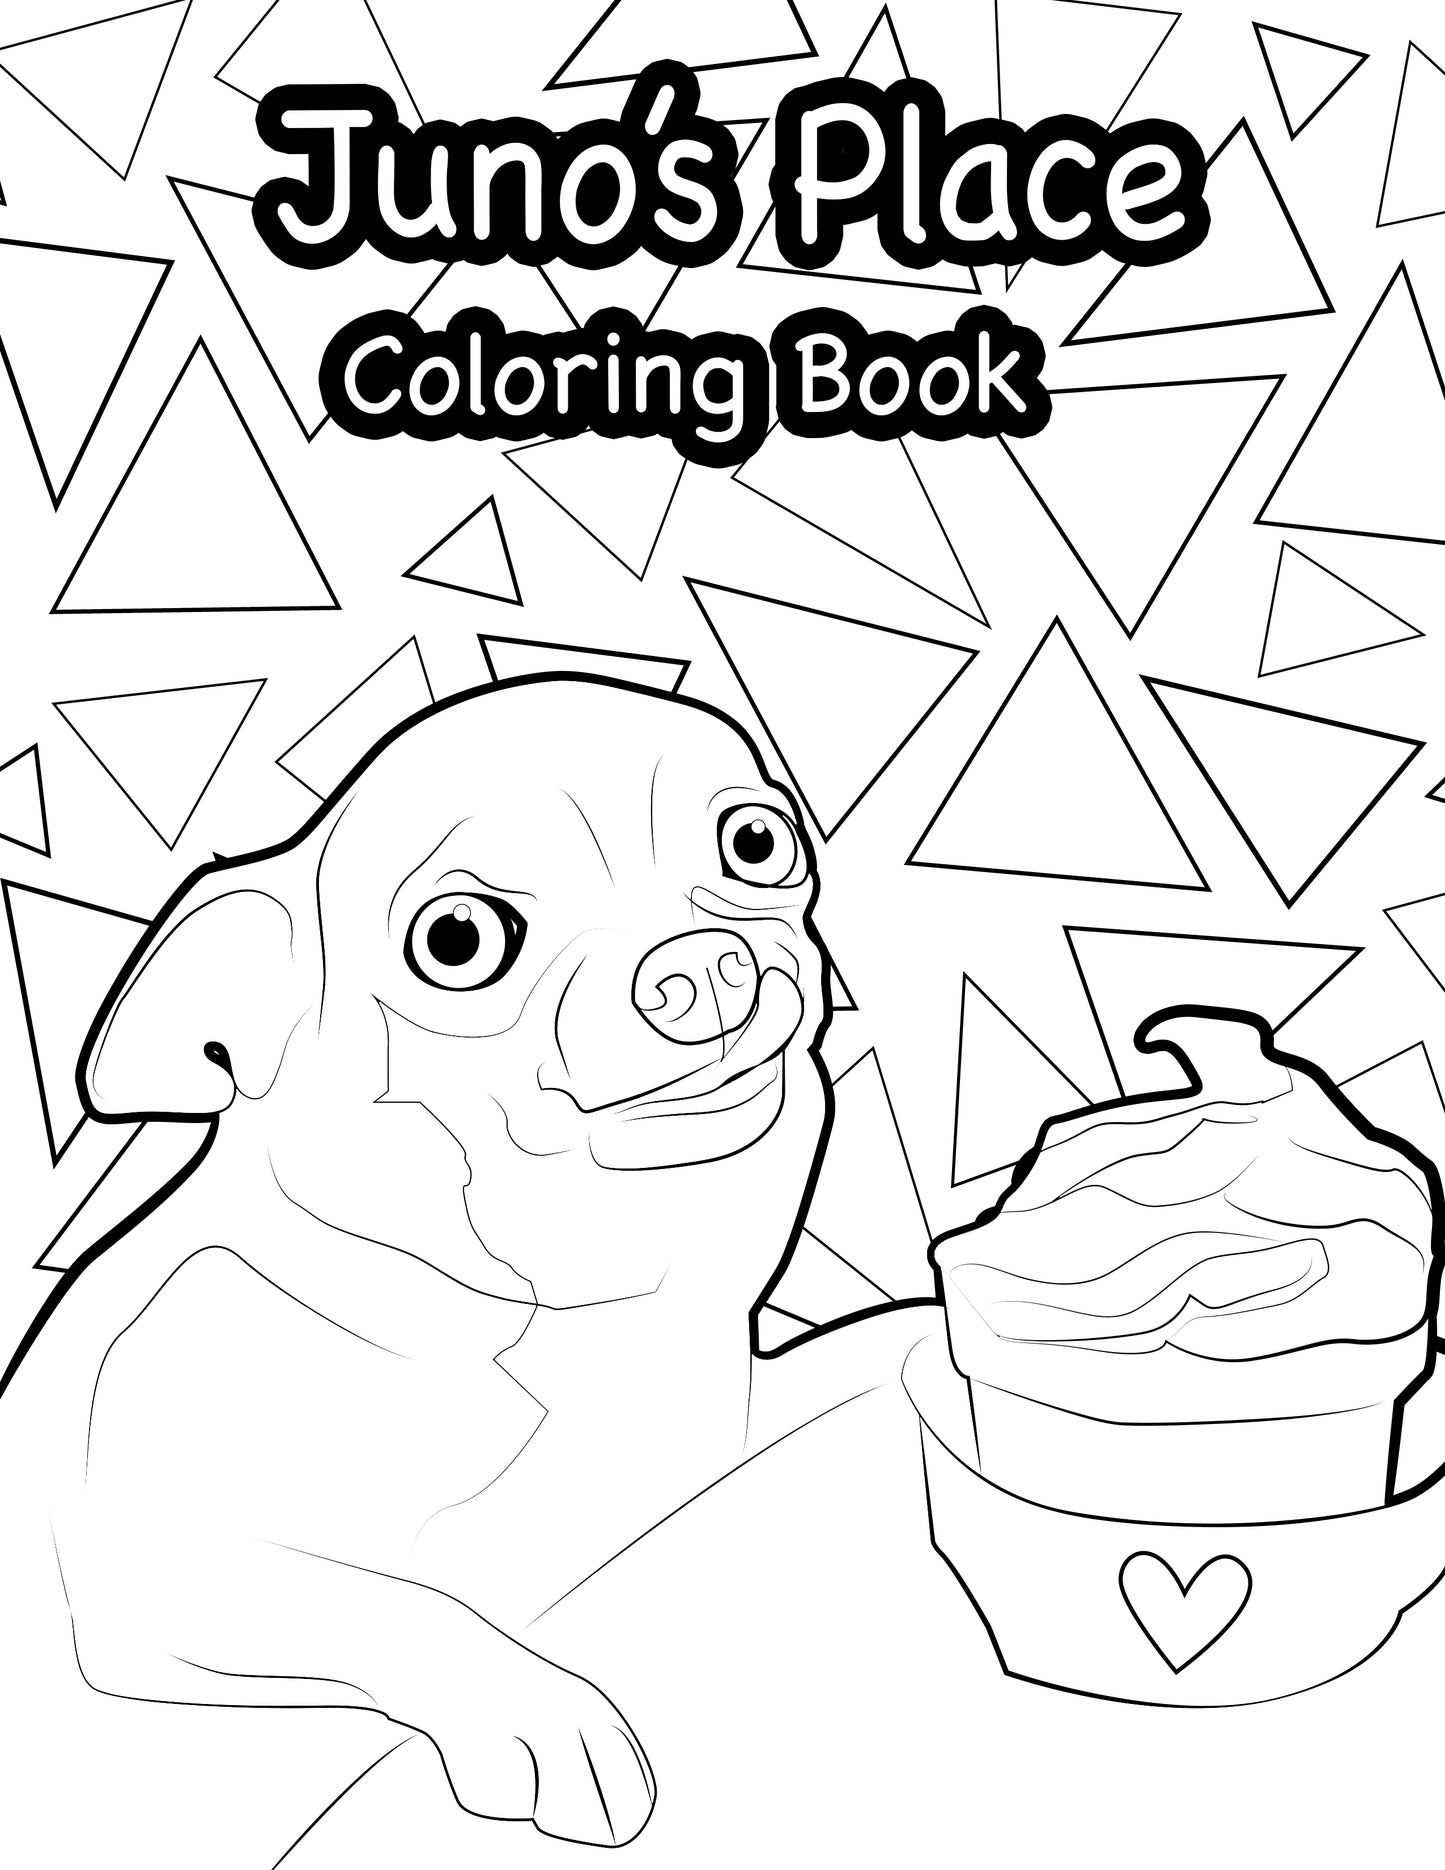 Juno's Place Coloring Book